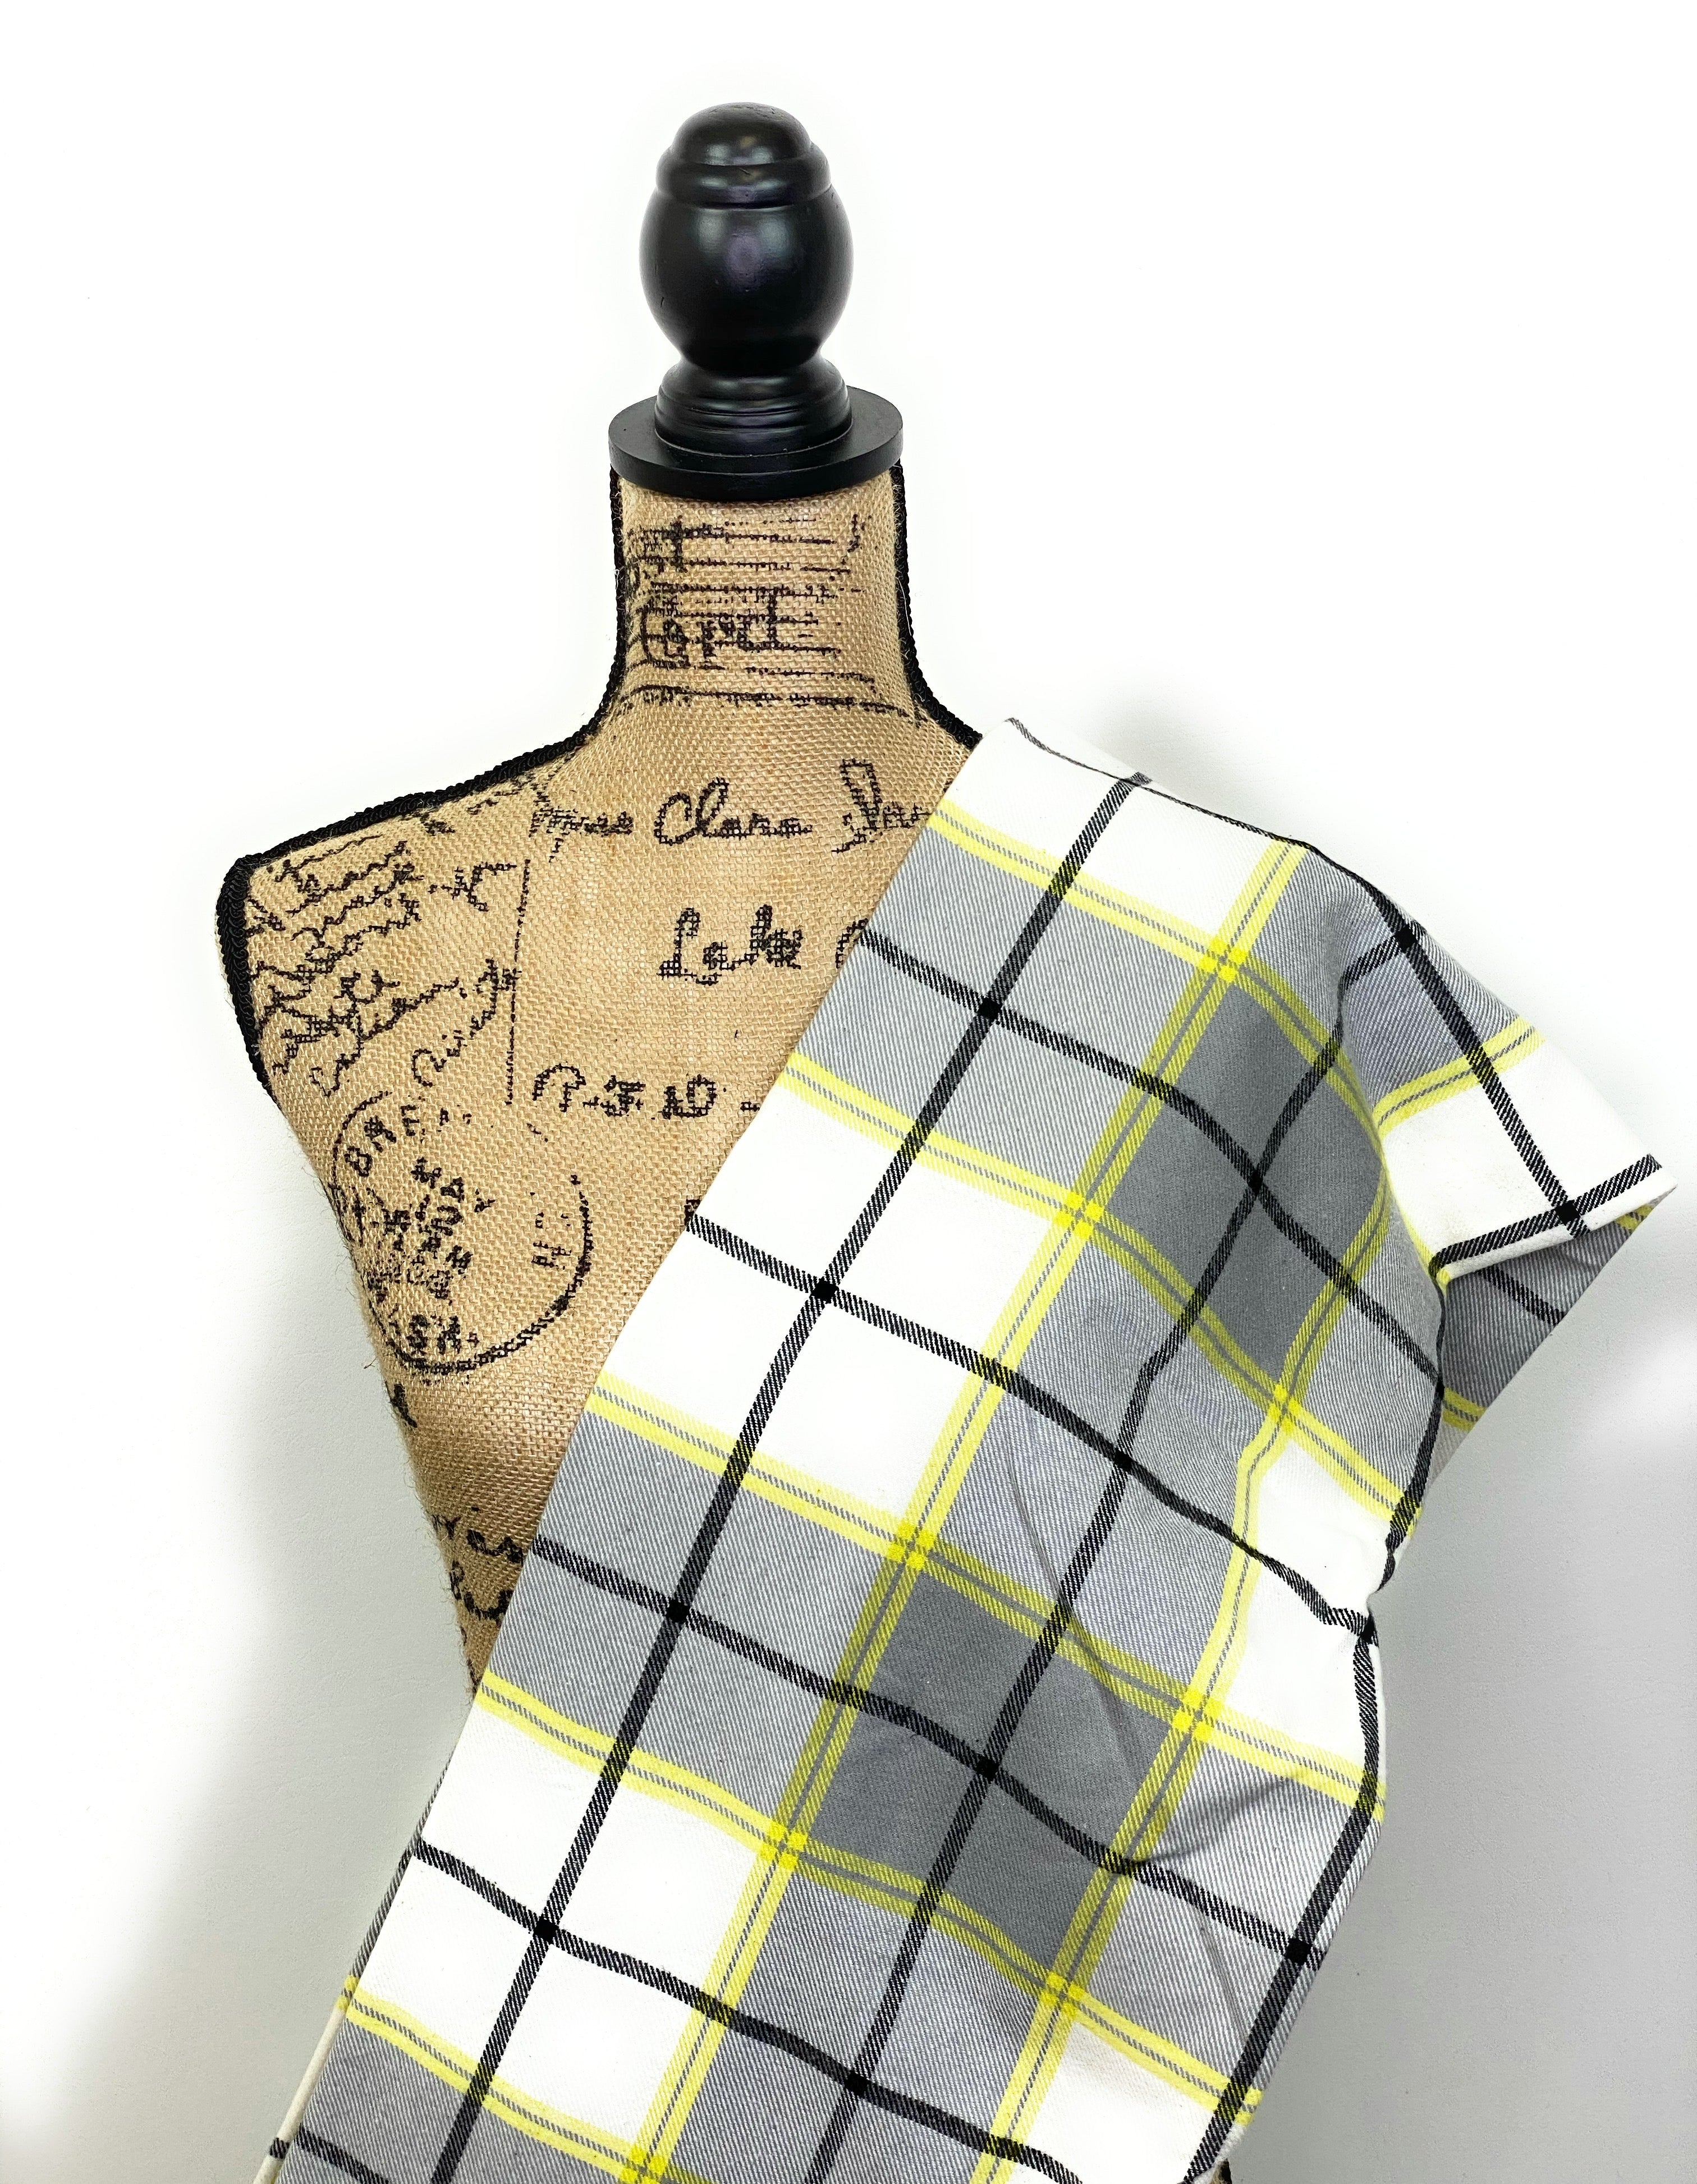 White, Gray, Black, and Yellow Plaid Flannel Infinity or Blanket Scarf